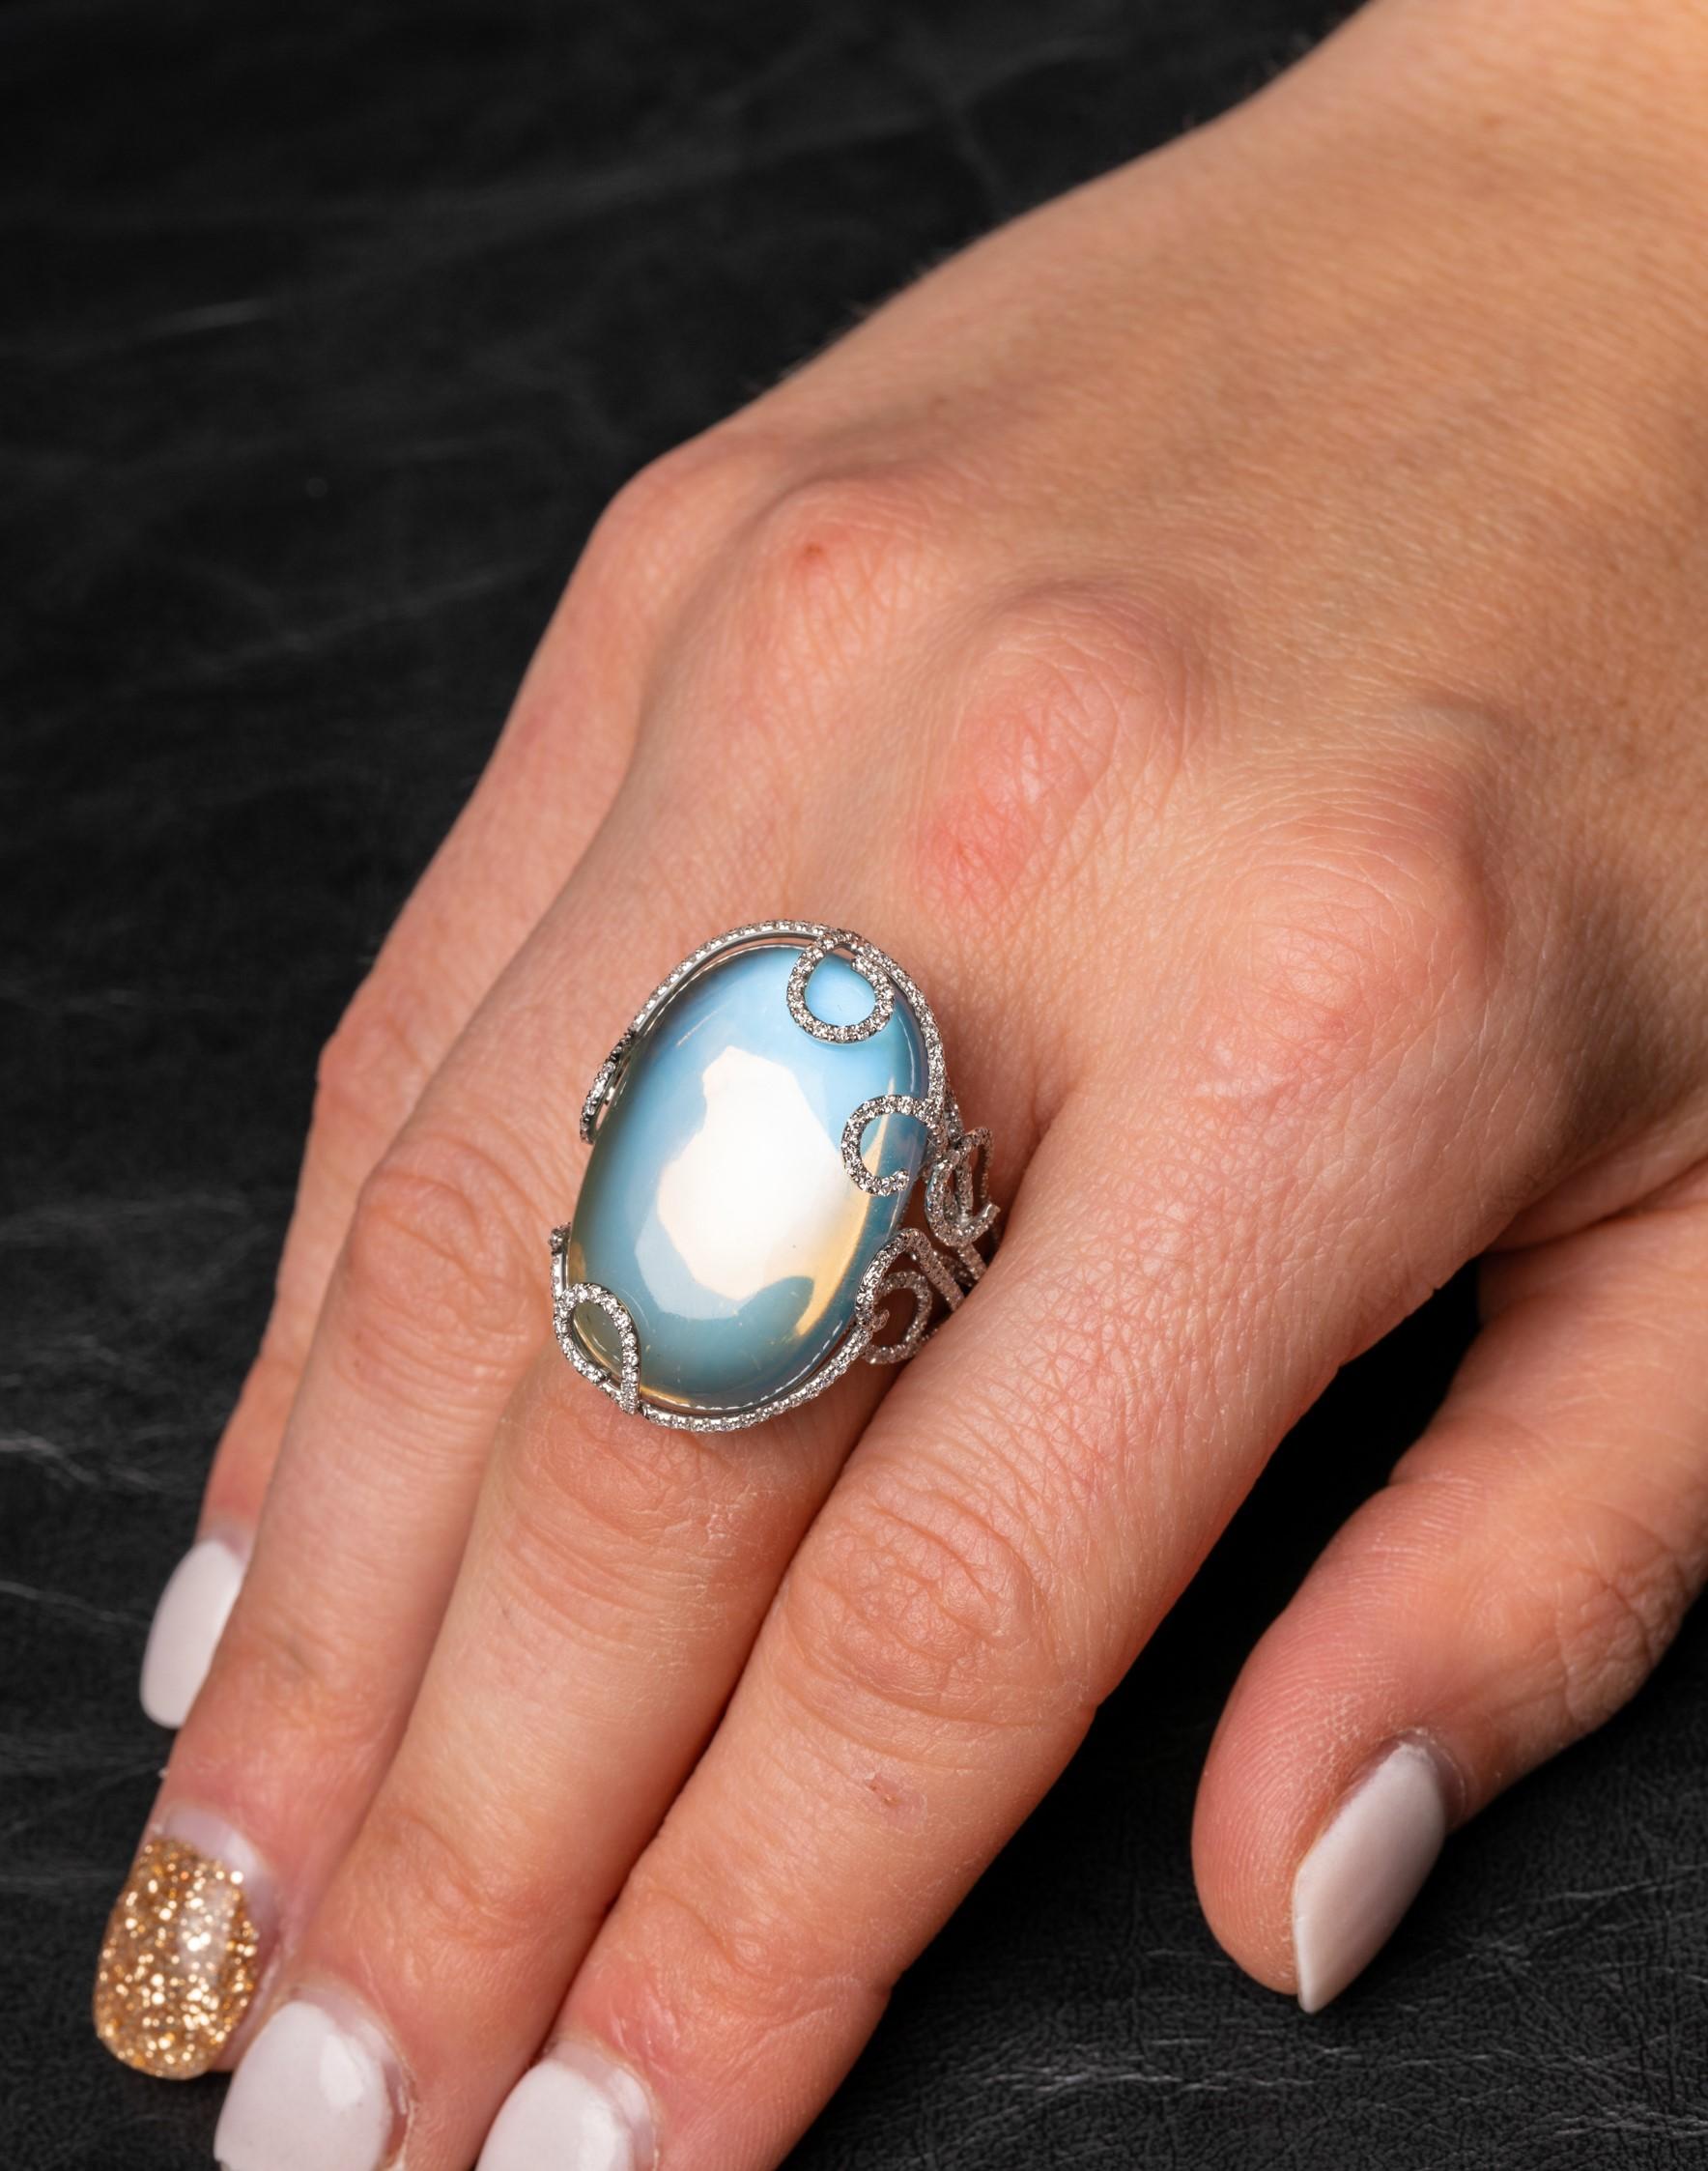 Oval Cut 40 Carat Blue Sheen Moonstone Ring with 1.92 Carat of Diamonds